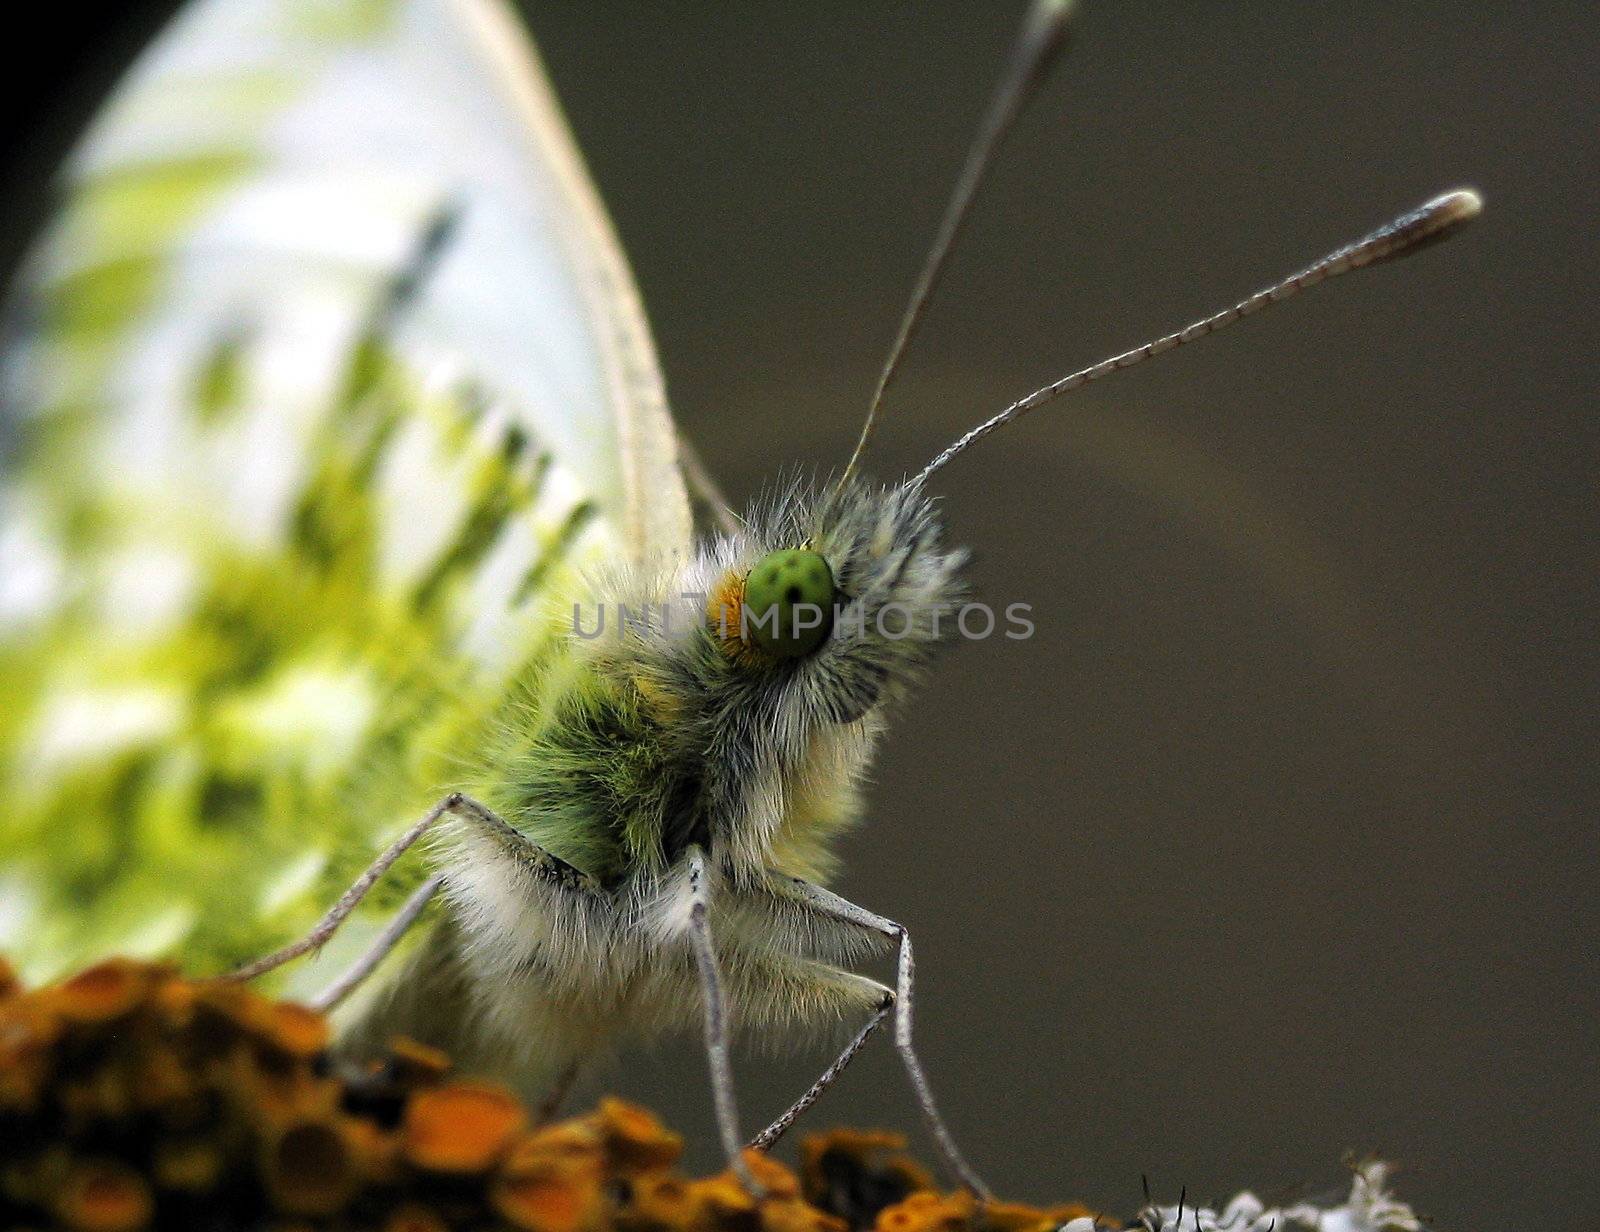 Butterfly with green eyes. Macro view.